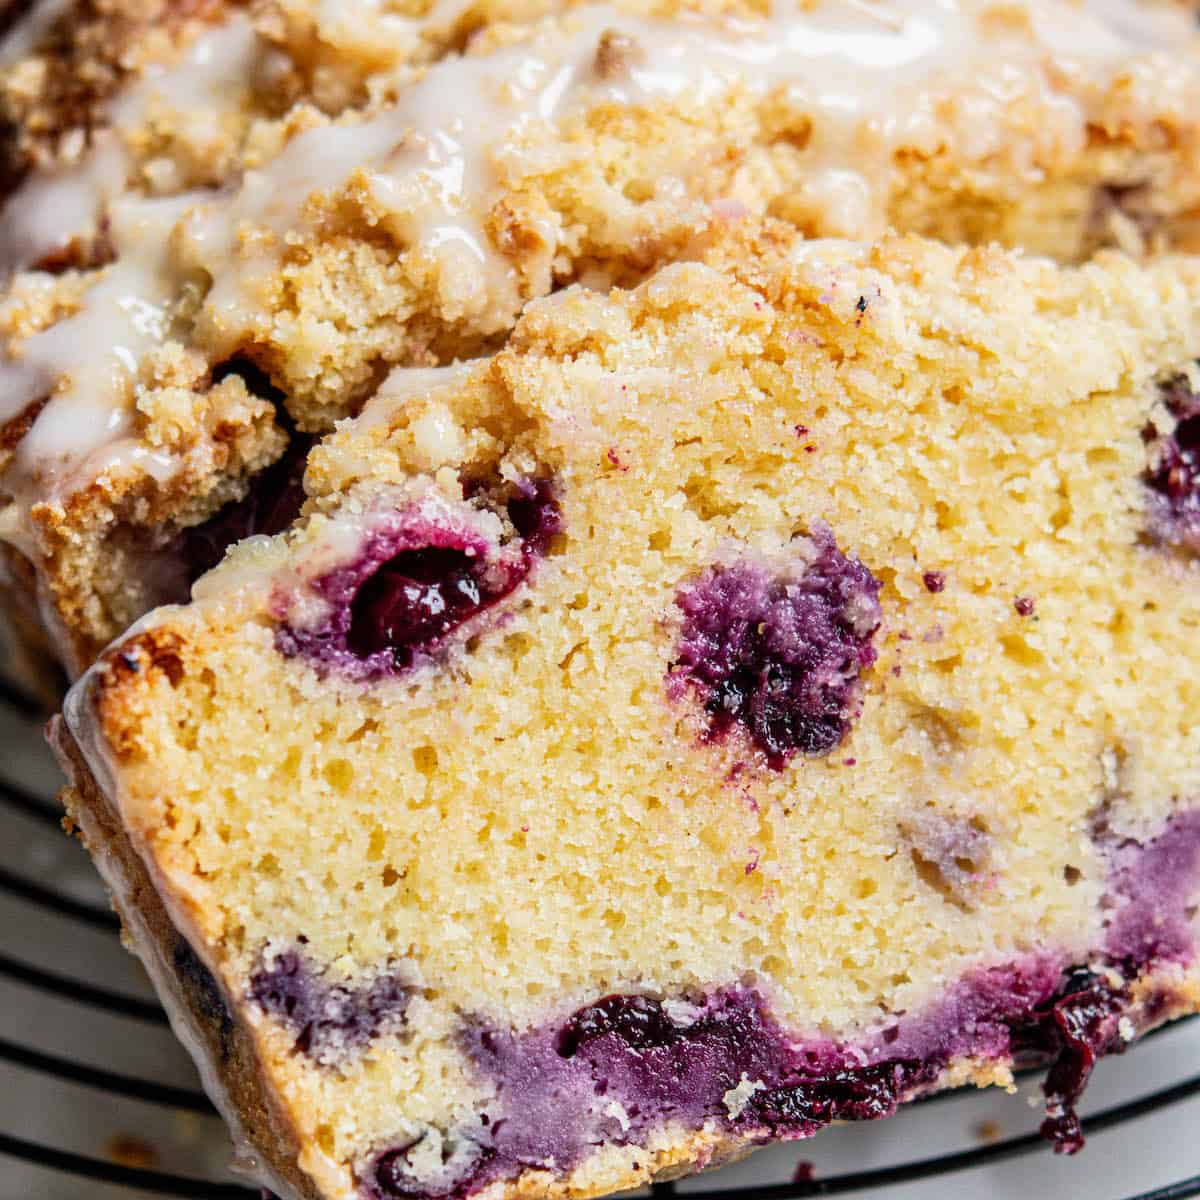 slice of blueberry cake with purple berries.